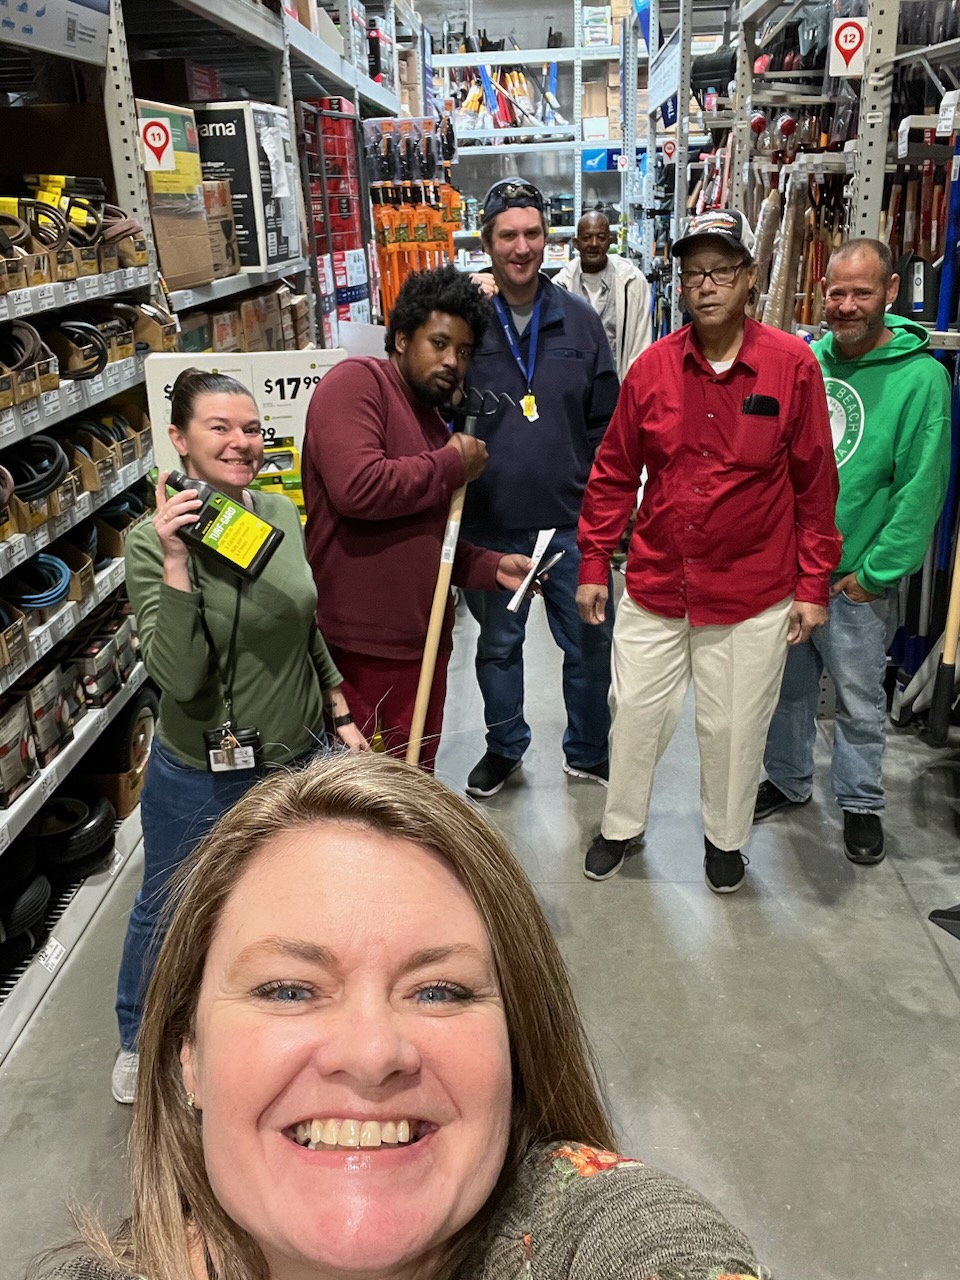 Richmond PSR Behavioral Specialist Chrystal Weatherly takes a selfie while Amanda Kempen, left, and program attendees visit a local retailer to purchase gardening supplies thanks to a grant from the NC Cooperative Extension.